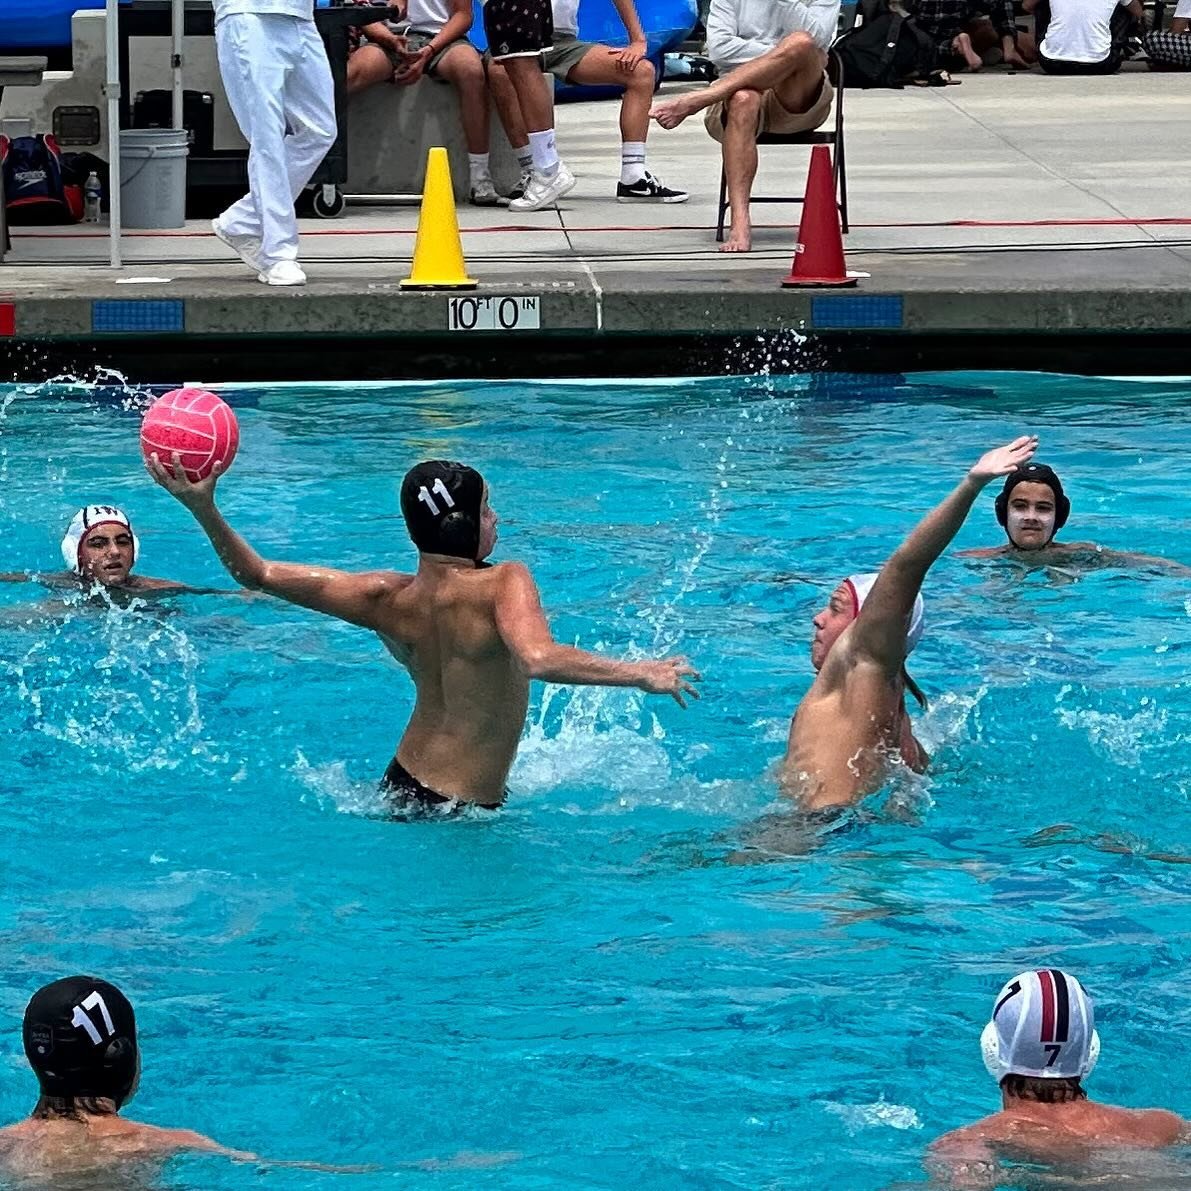 Schedule of the week 5/6-5/10

10U Coed (black)
@ GPN
Coaches: Jordan
Tuesday-Thursday 
5:30pm-7pm swim
7pm-8pm polo	

10U Coed (red) 
@ WAC (Dive Pool)
Coaches: Tim
Monday-Thursday
4pm-6pm 
Please note Monday will be 4:30pm start
(Dryland 1st 20min)